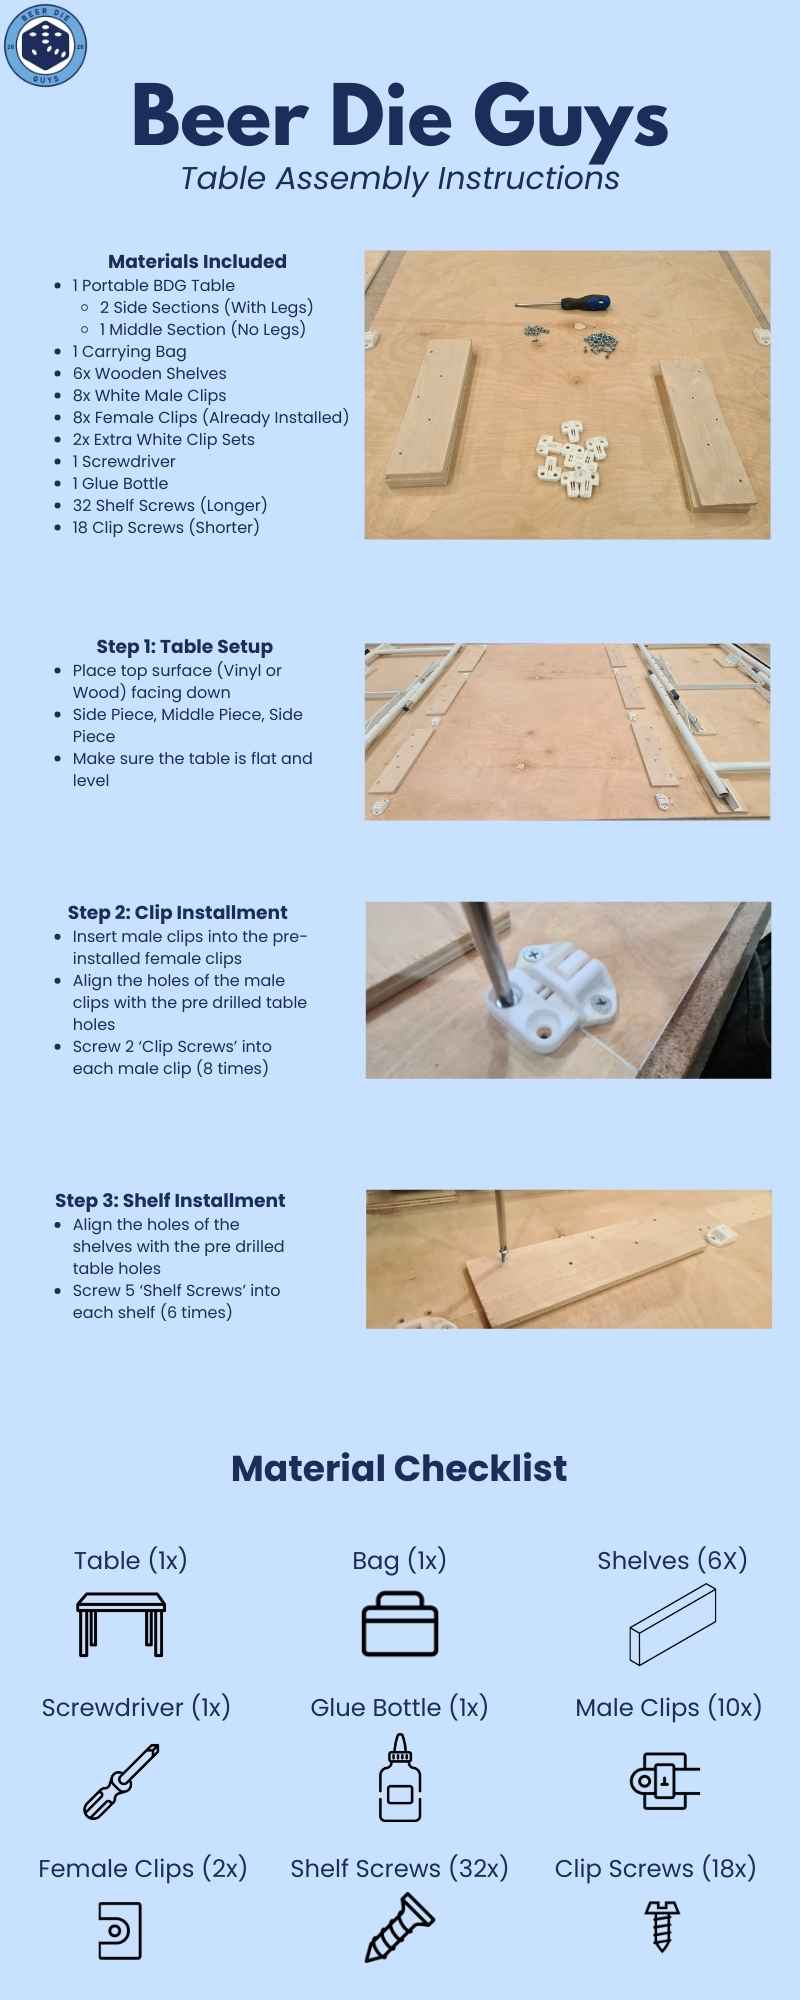 bdg table assembly